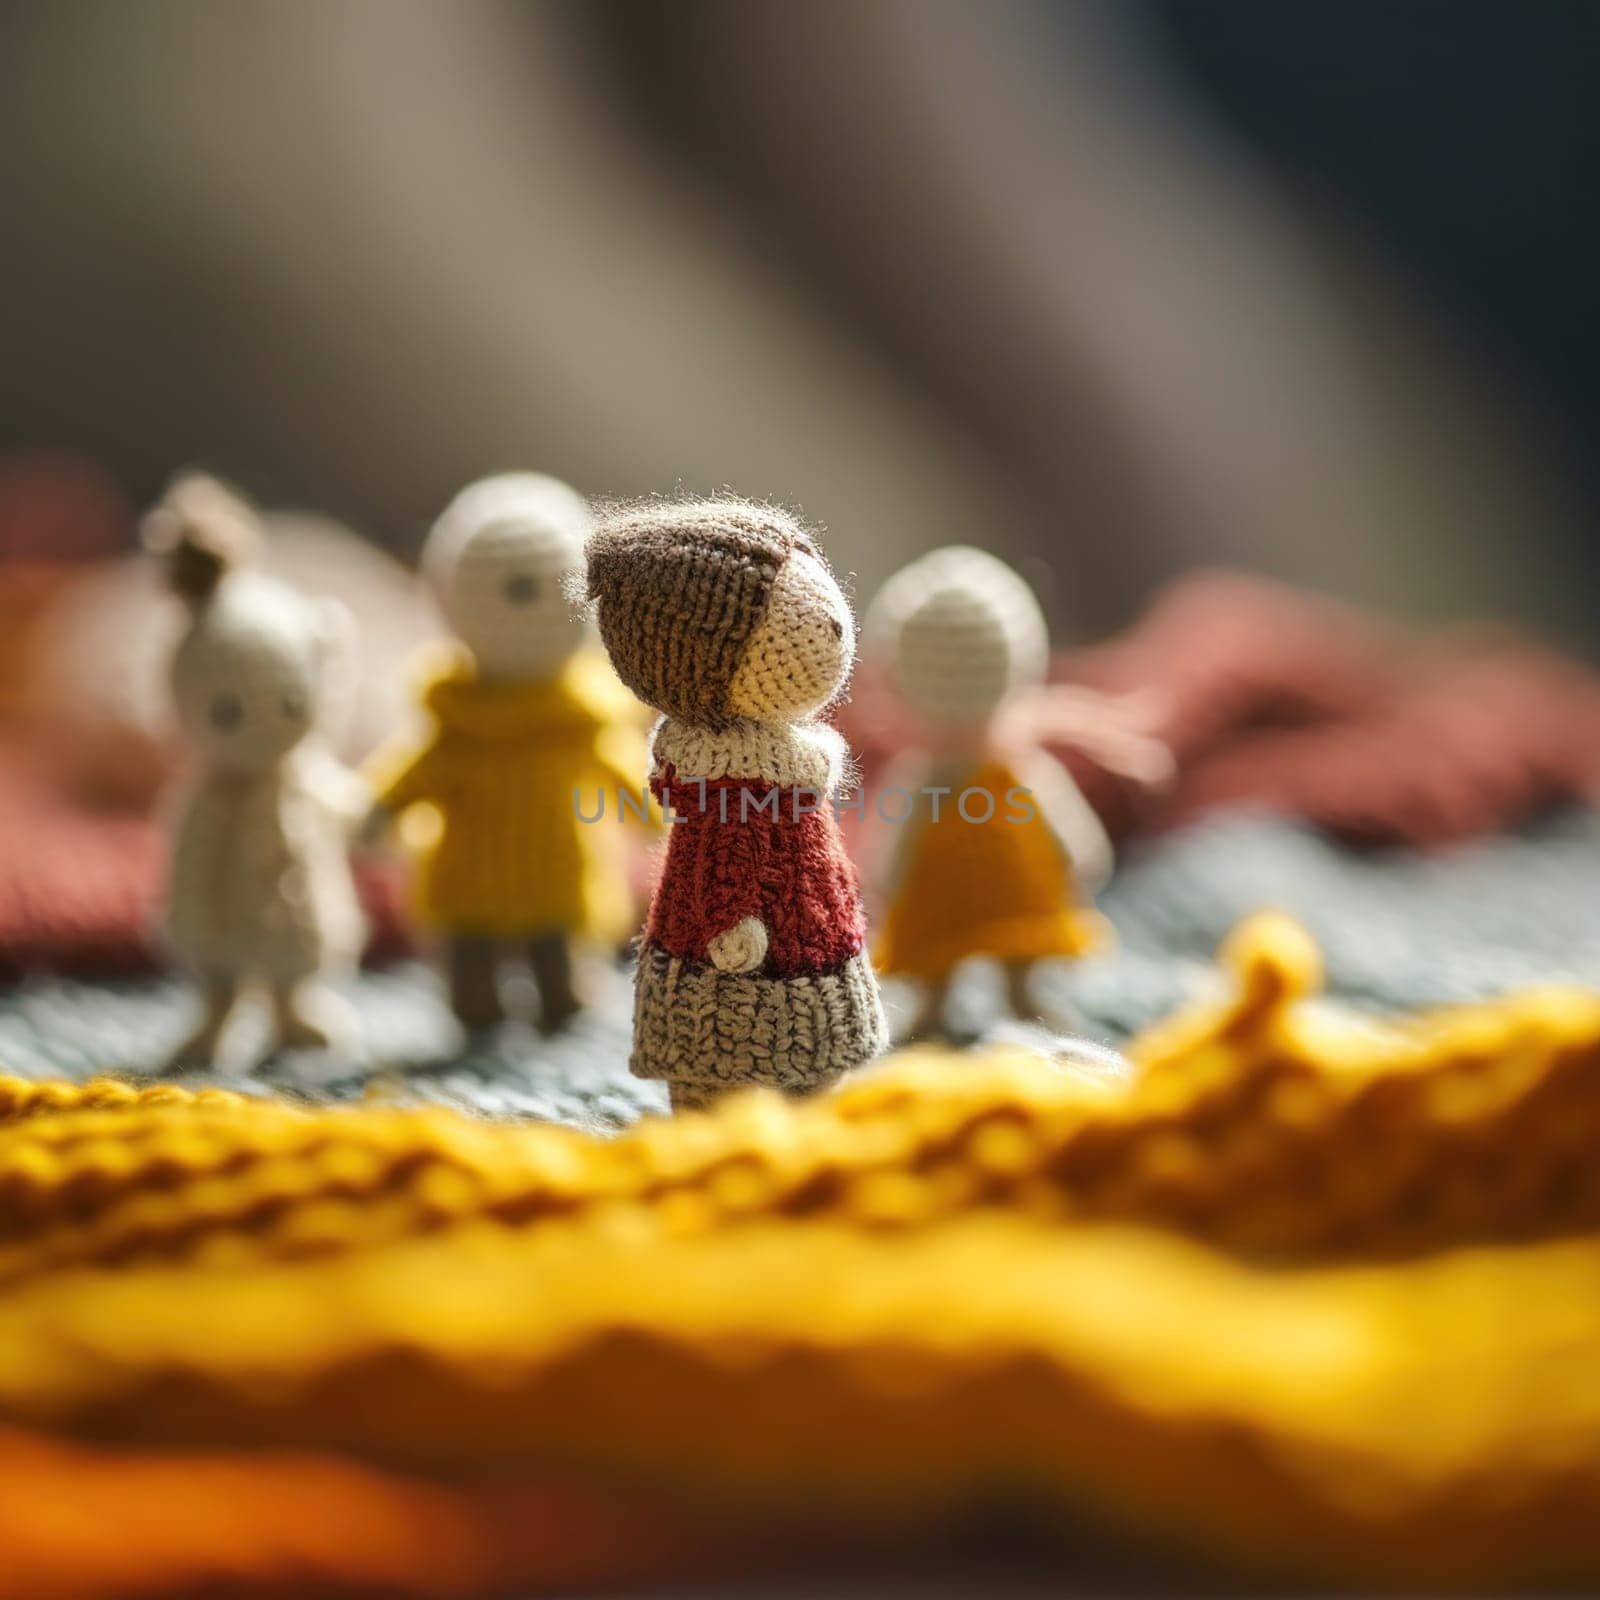 A group of small knitted dolls standing on a blanket, AI by starush